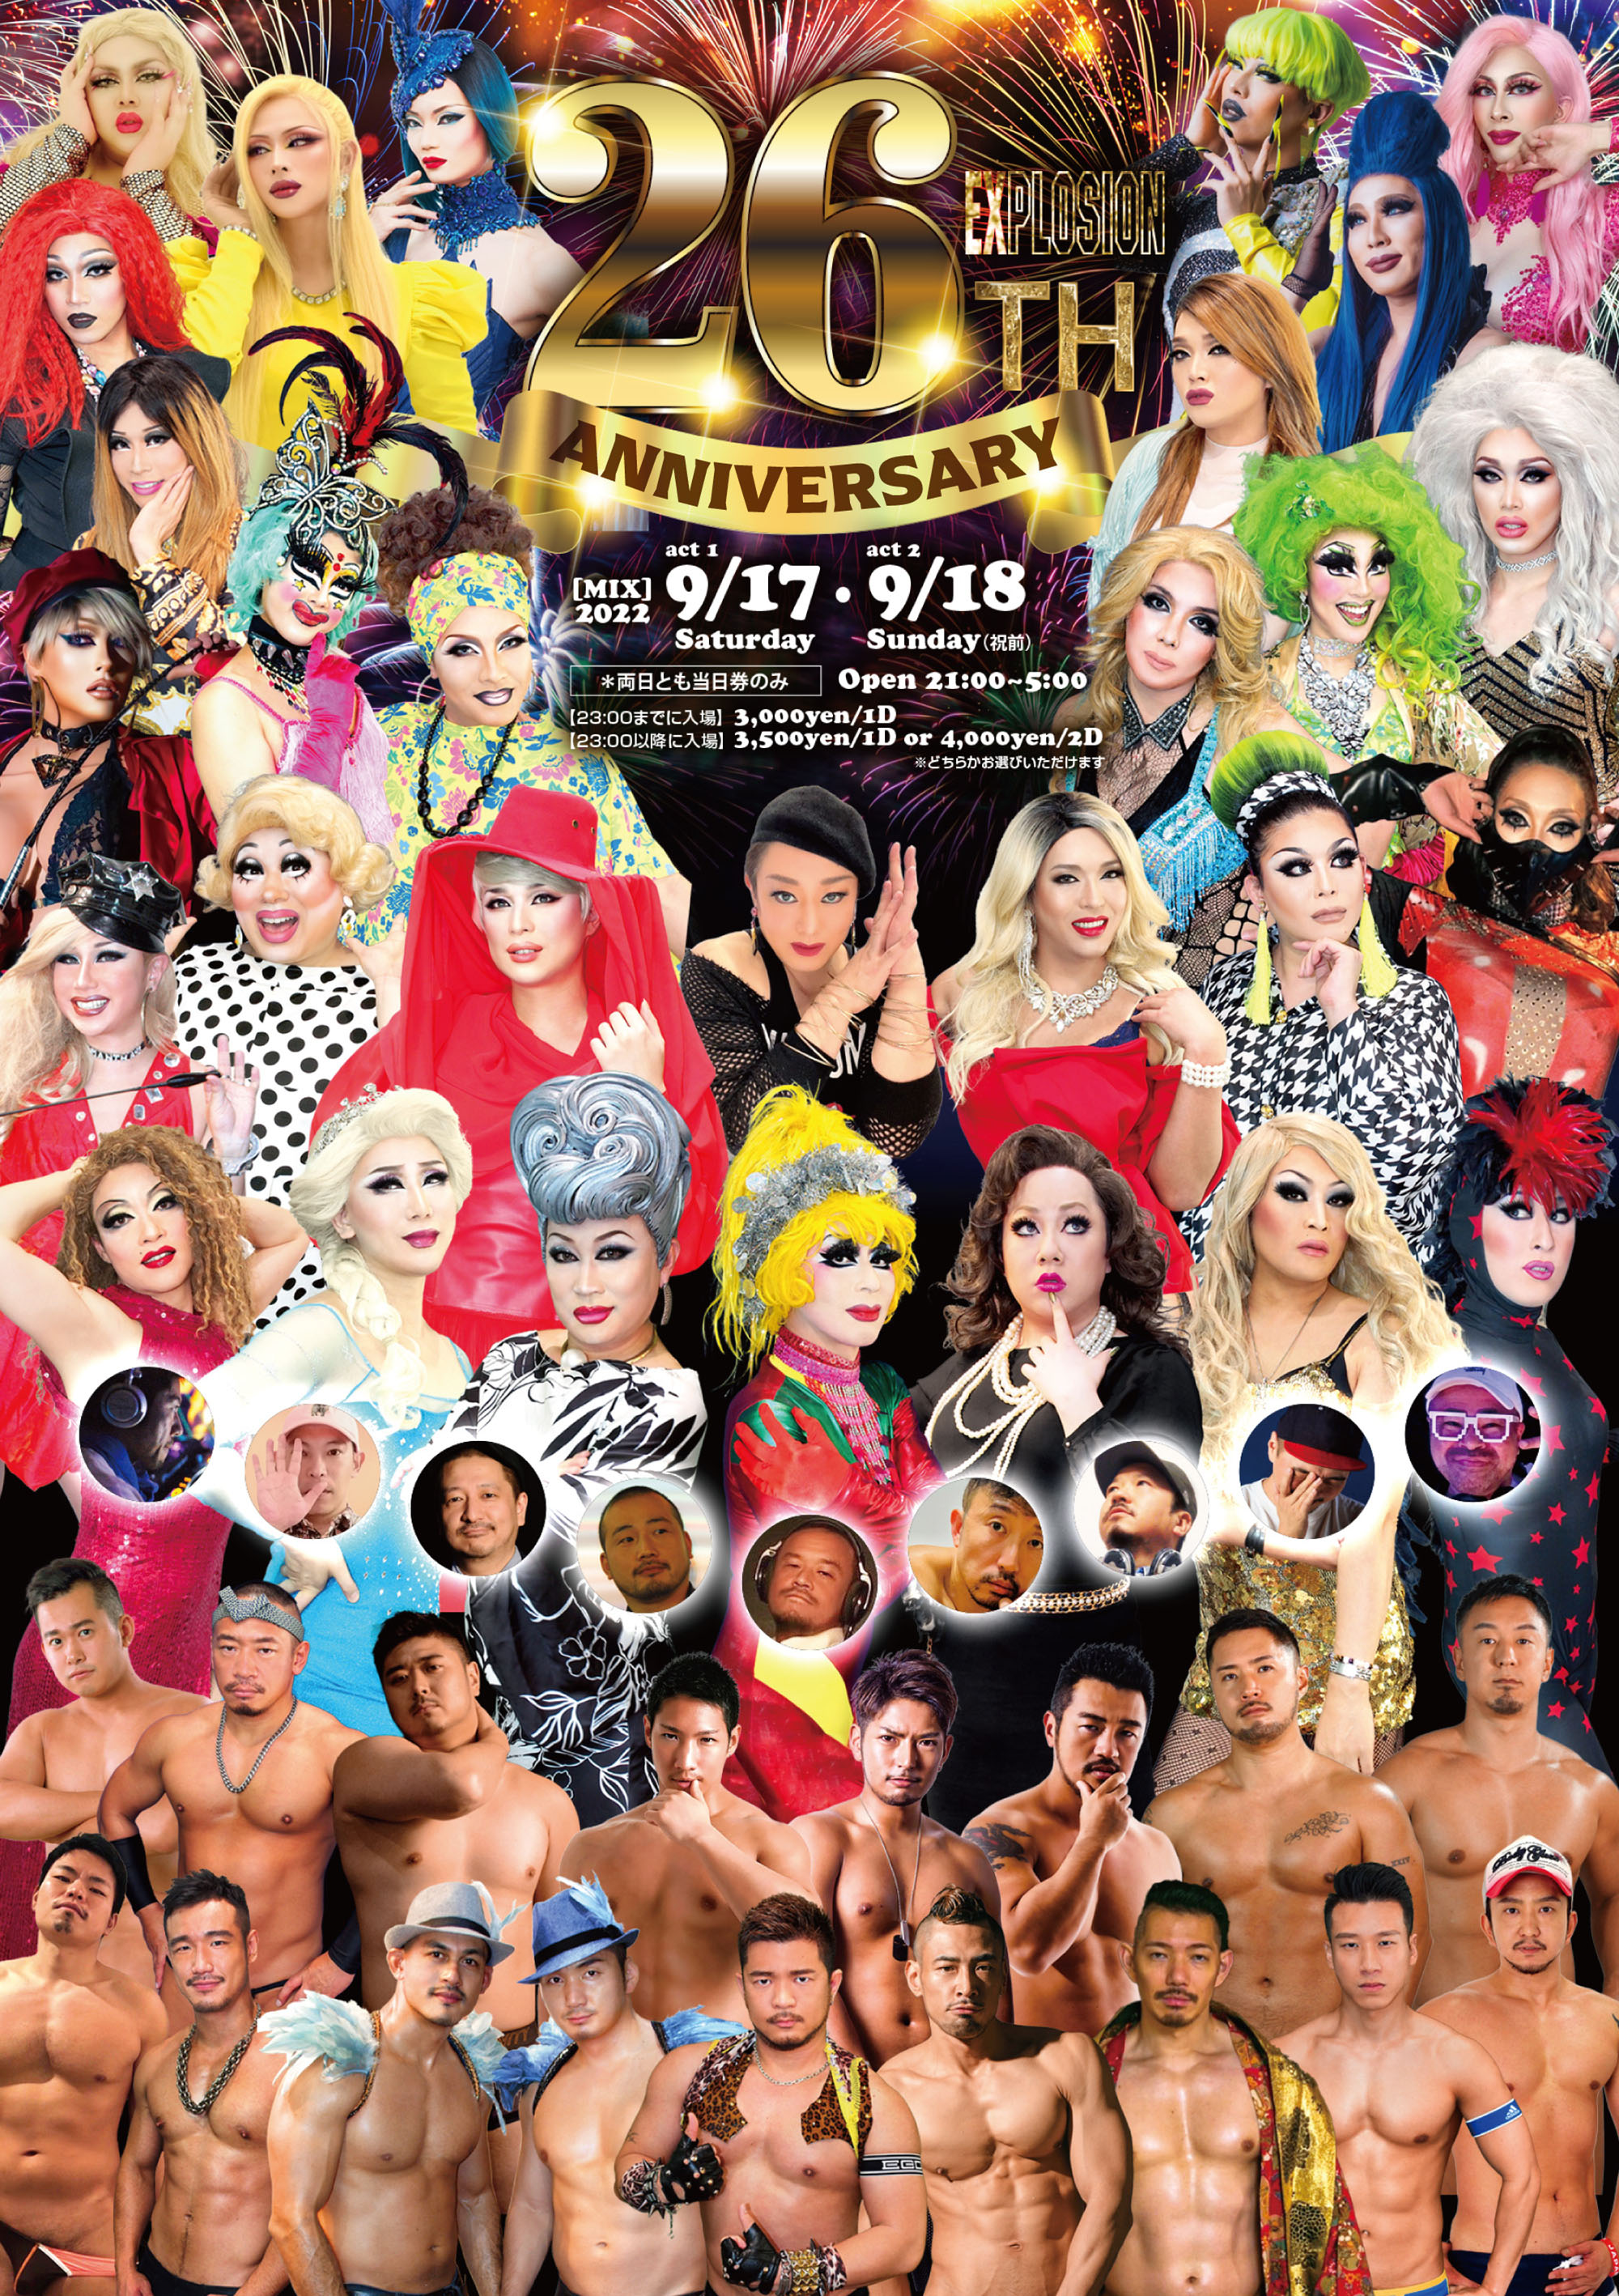 9/17(SAT) 21:00～5:00 EXPLOSION 26th Anniversary act 1 ＜MIX＞